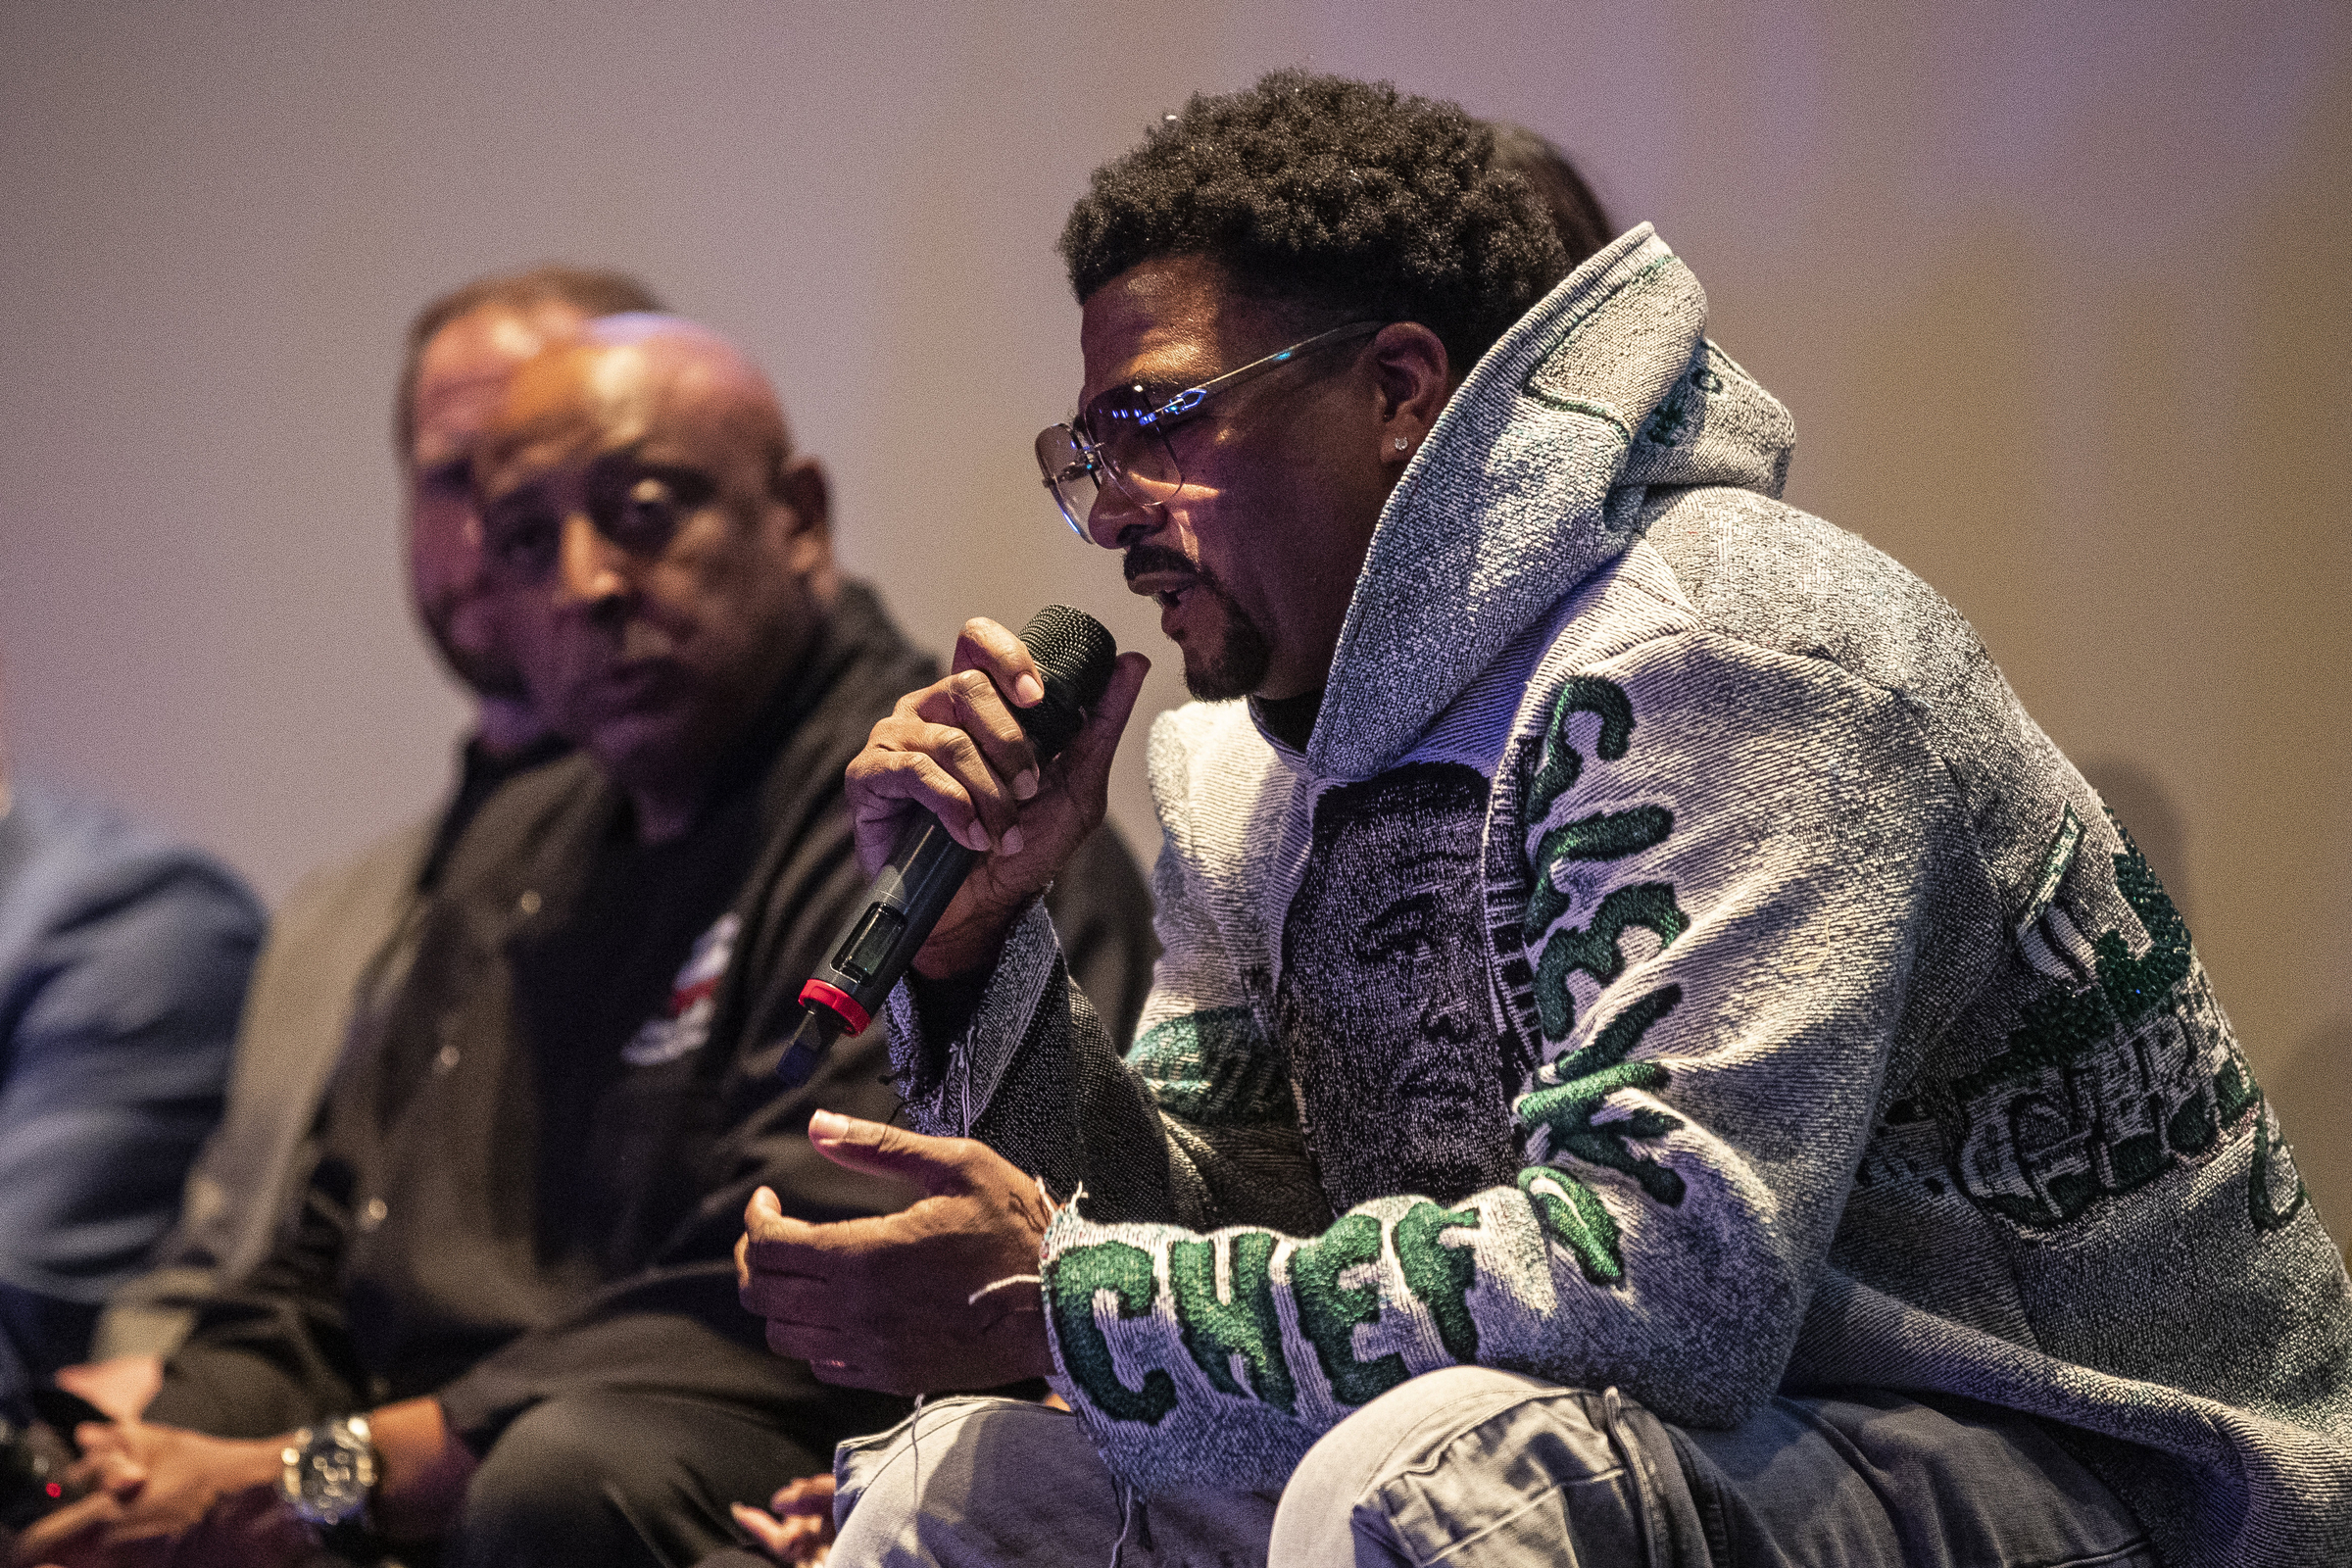 Chef Jimmy Lee Hill and Dink Dawson speak during the panel discussion after the Michigan premiere of "Coldwater Kitchen" on the first day of Freep Film Festival at the Detroit Film Theatre in Detroit on Wednesday, April 26, 2023.